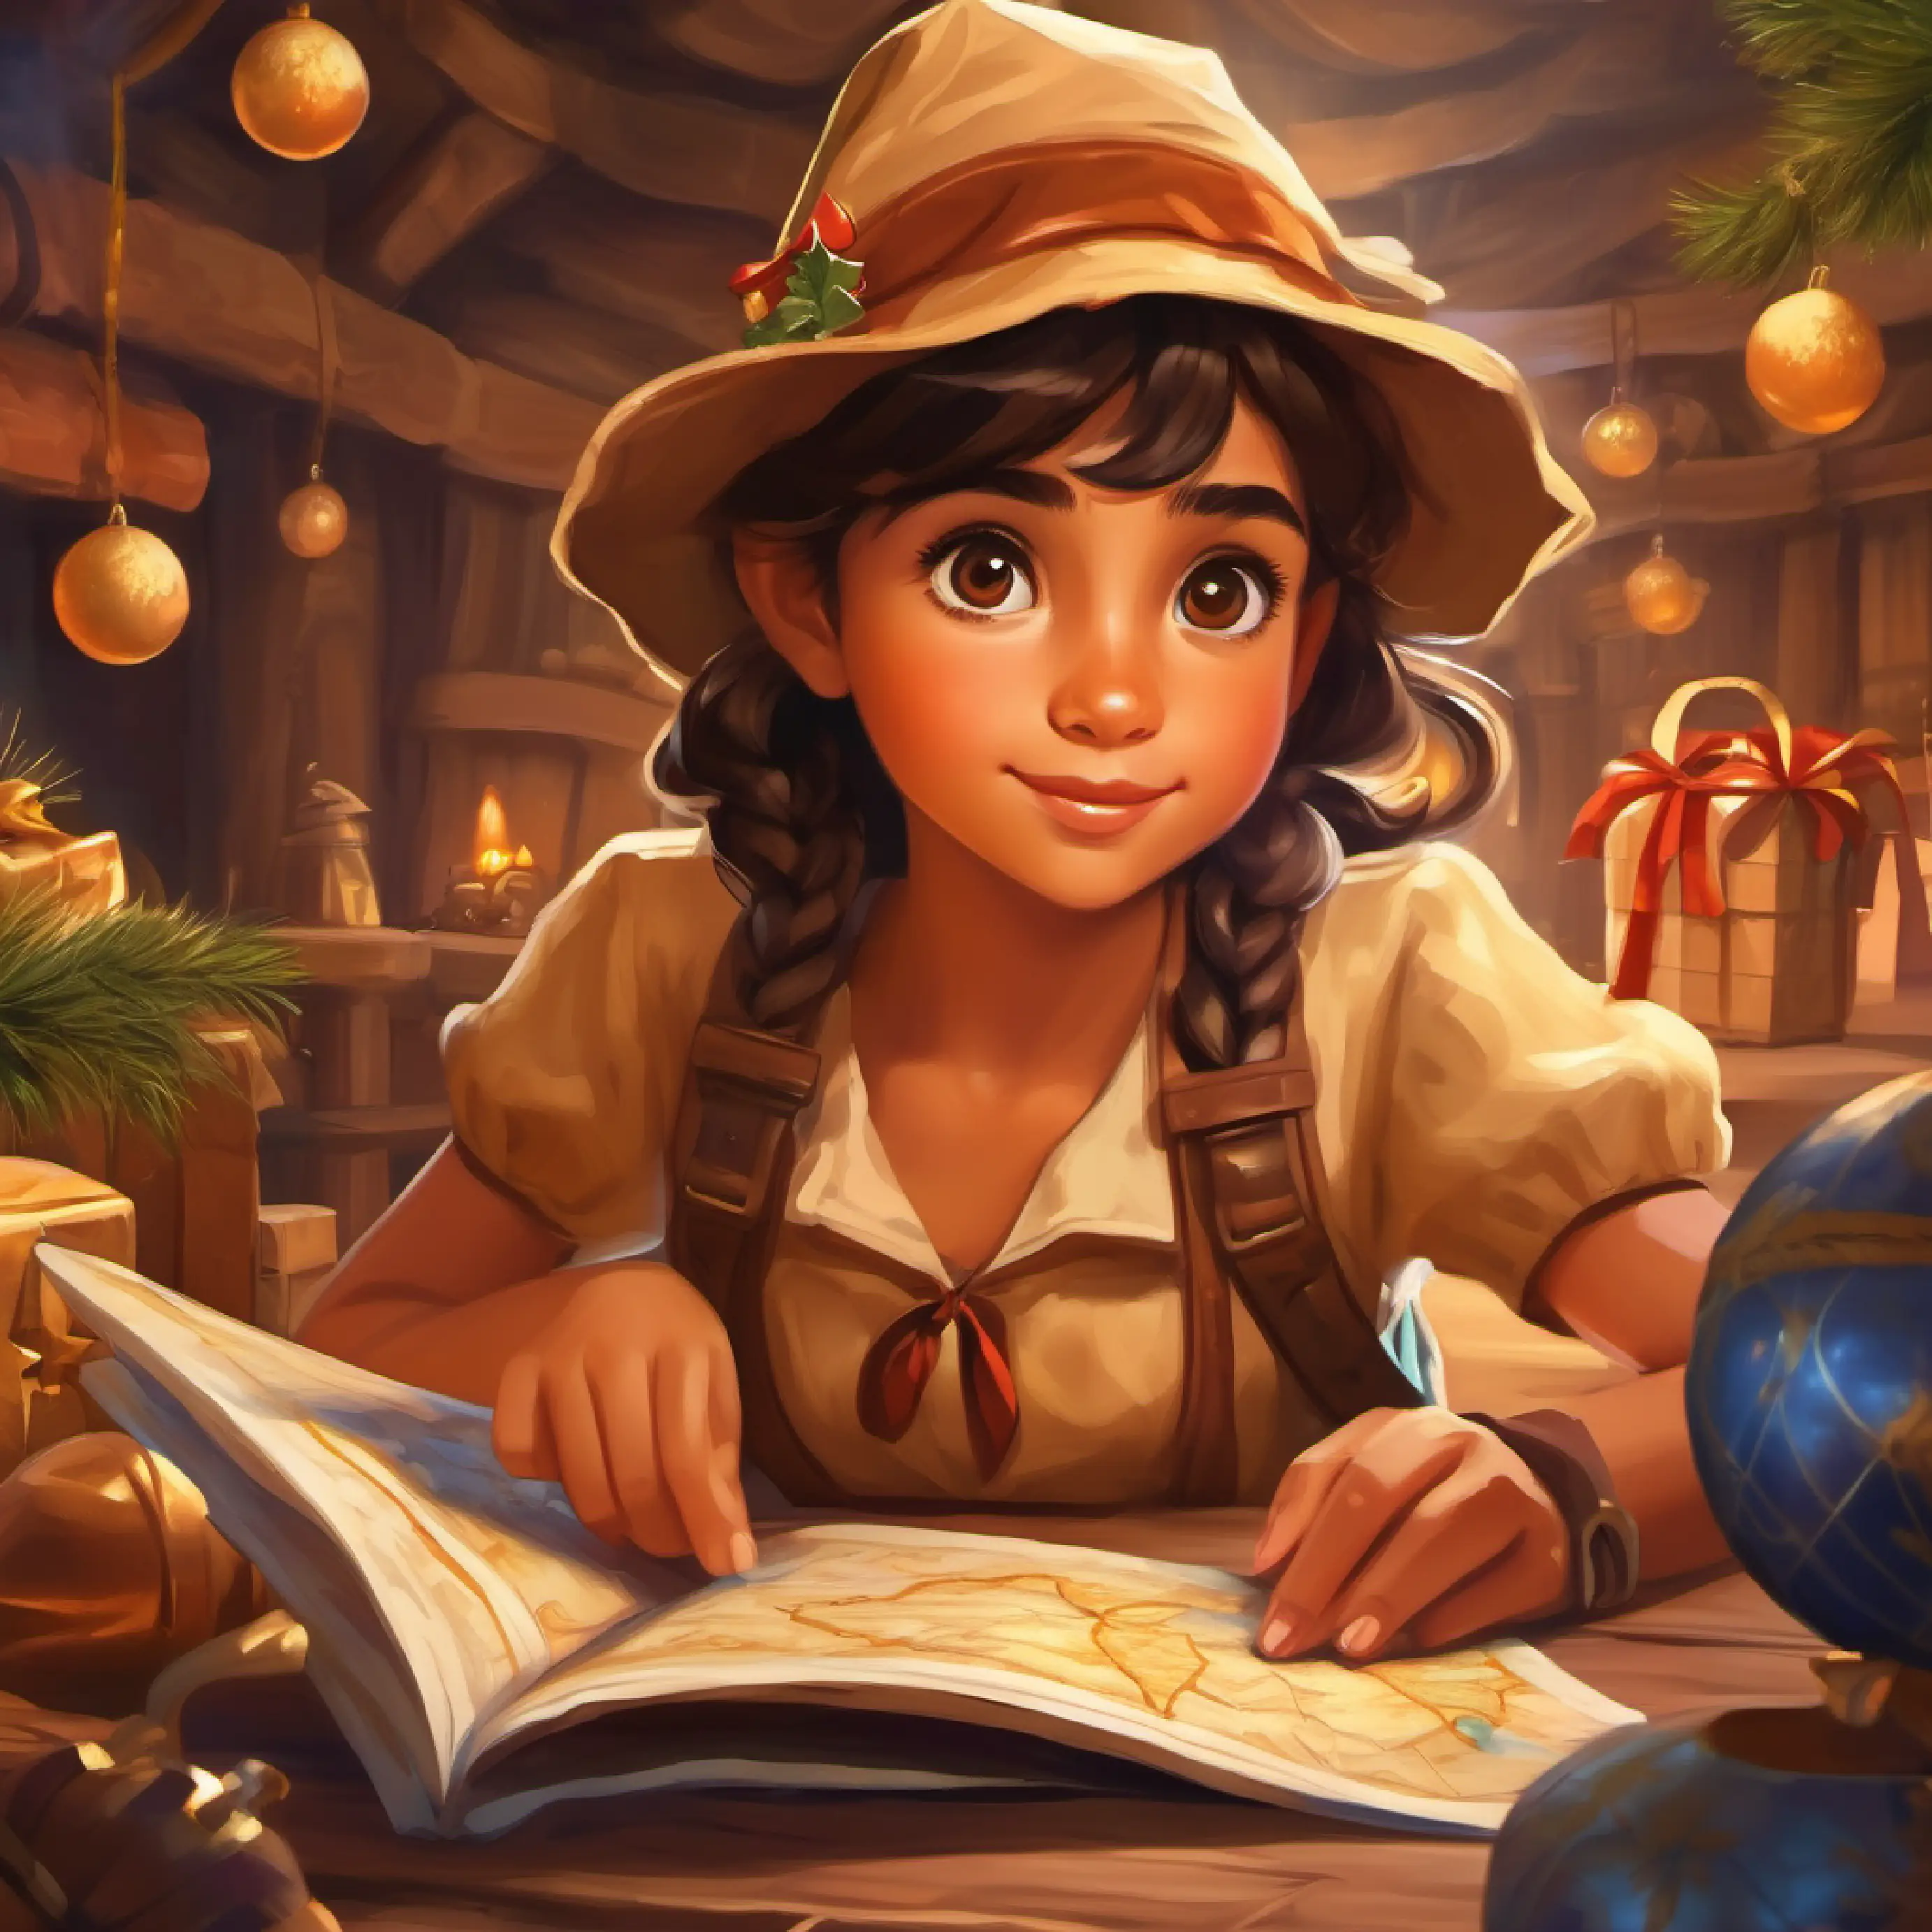 A spirited, curious girl with brown eyes and tanned skin eager for adventures begins her quest for treasure, map in hand and full of determination.